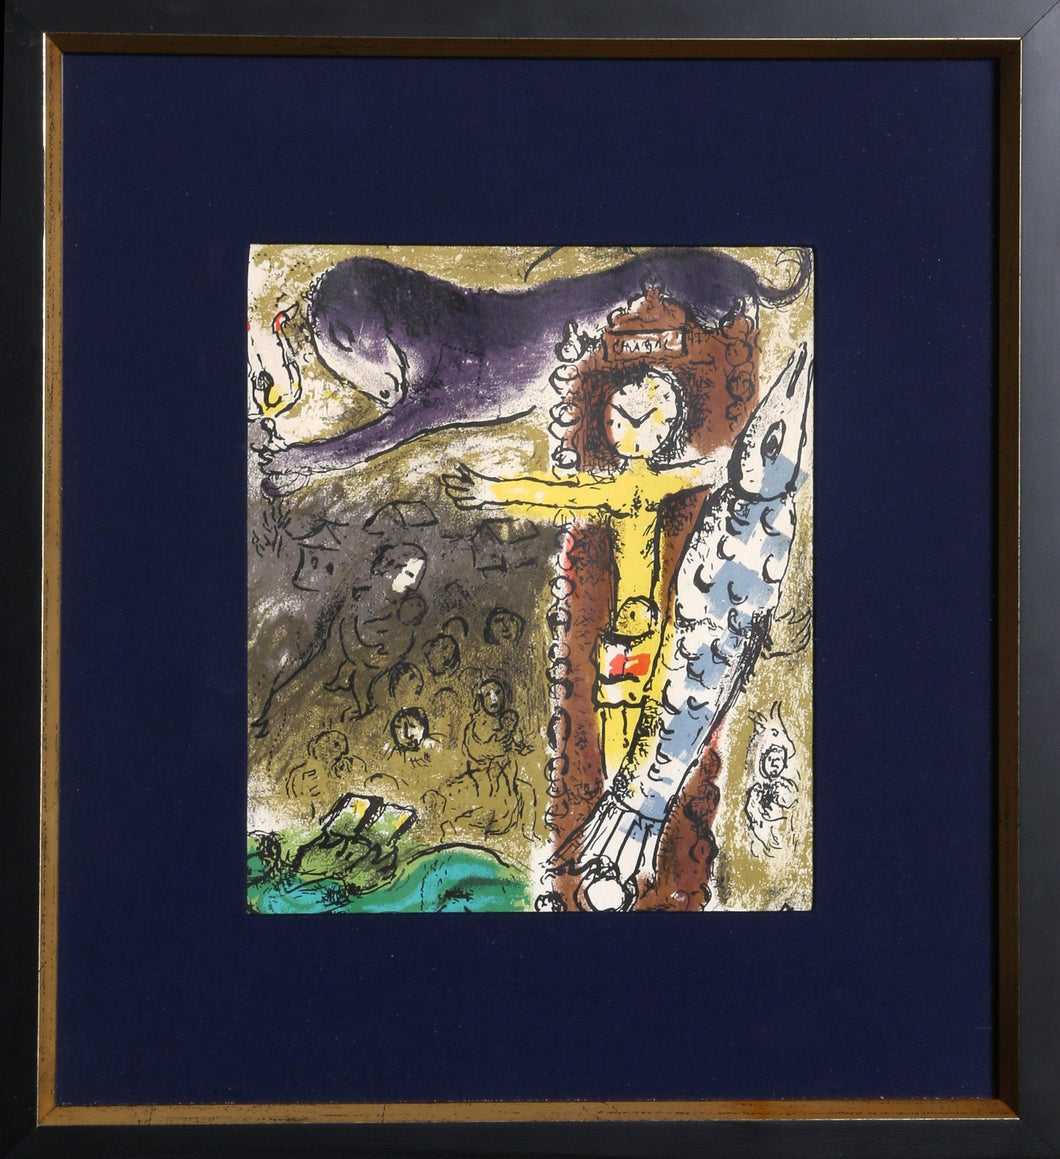 Le Christ l'Horloge Lithograph | Marc Chagall,{{product.type}}